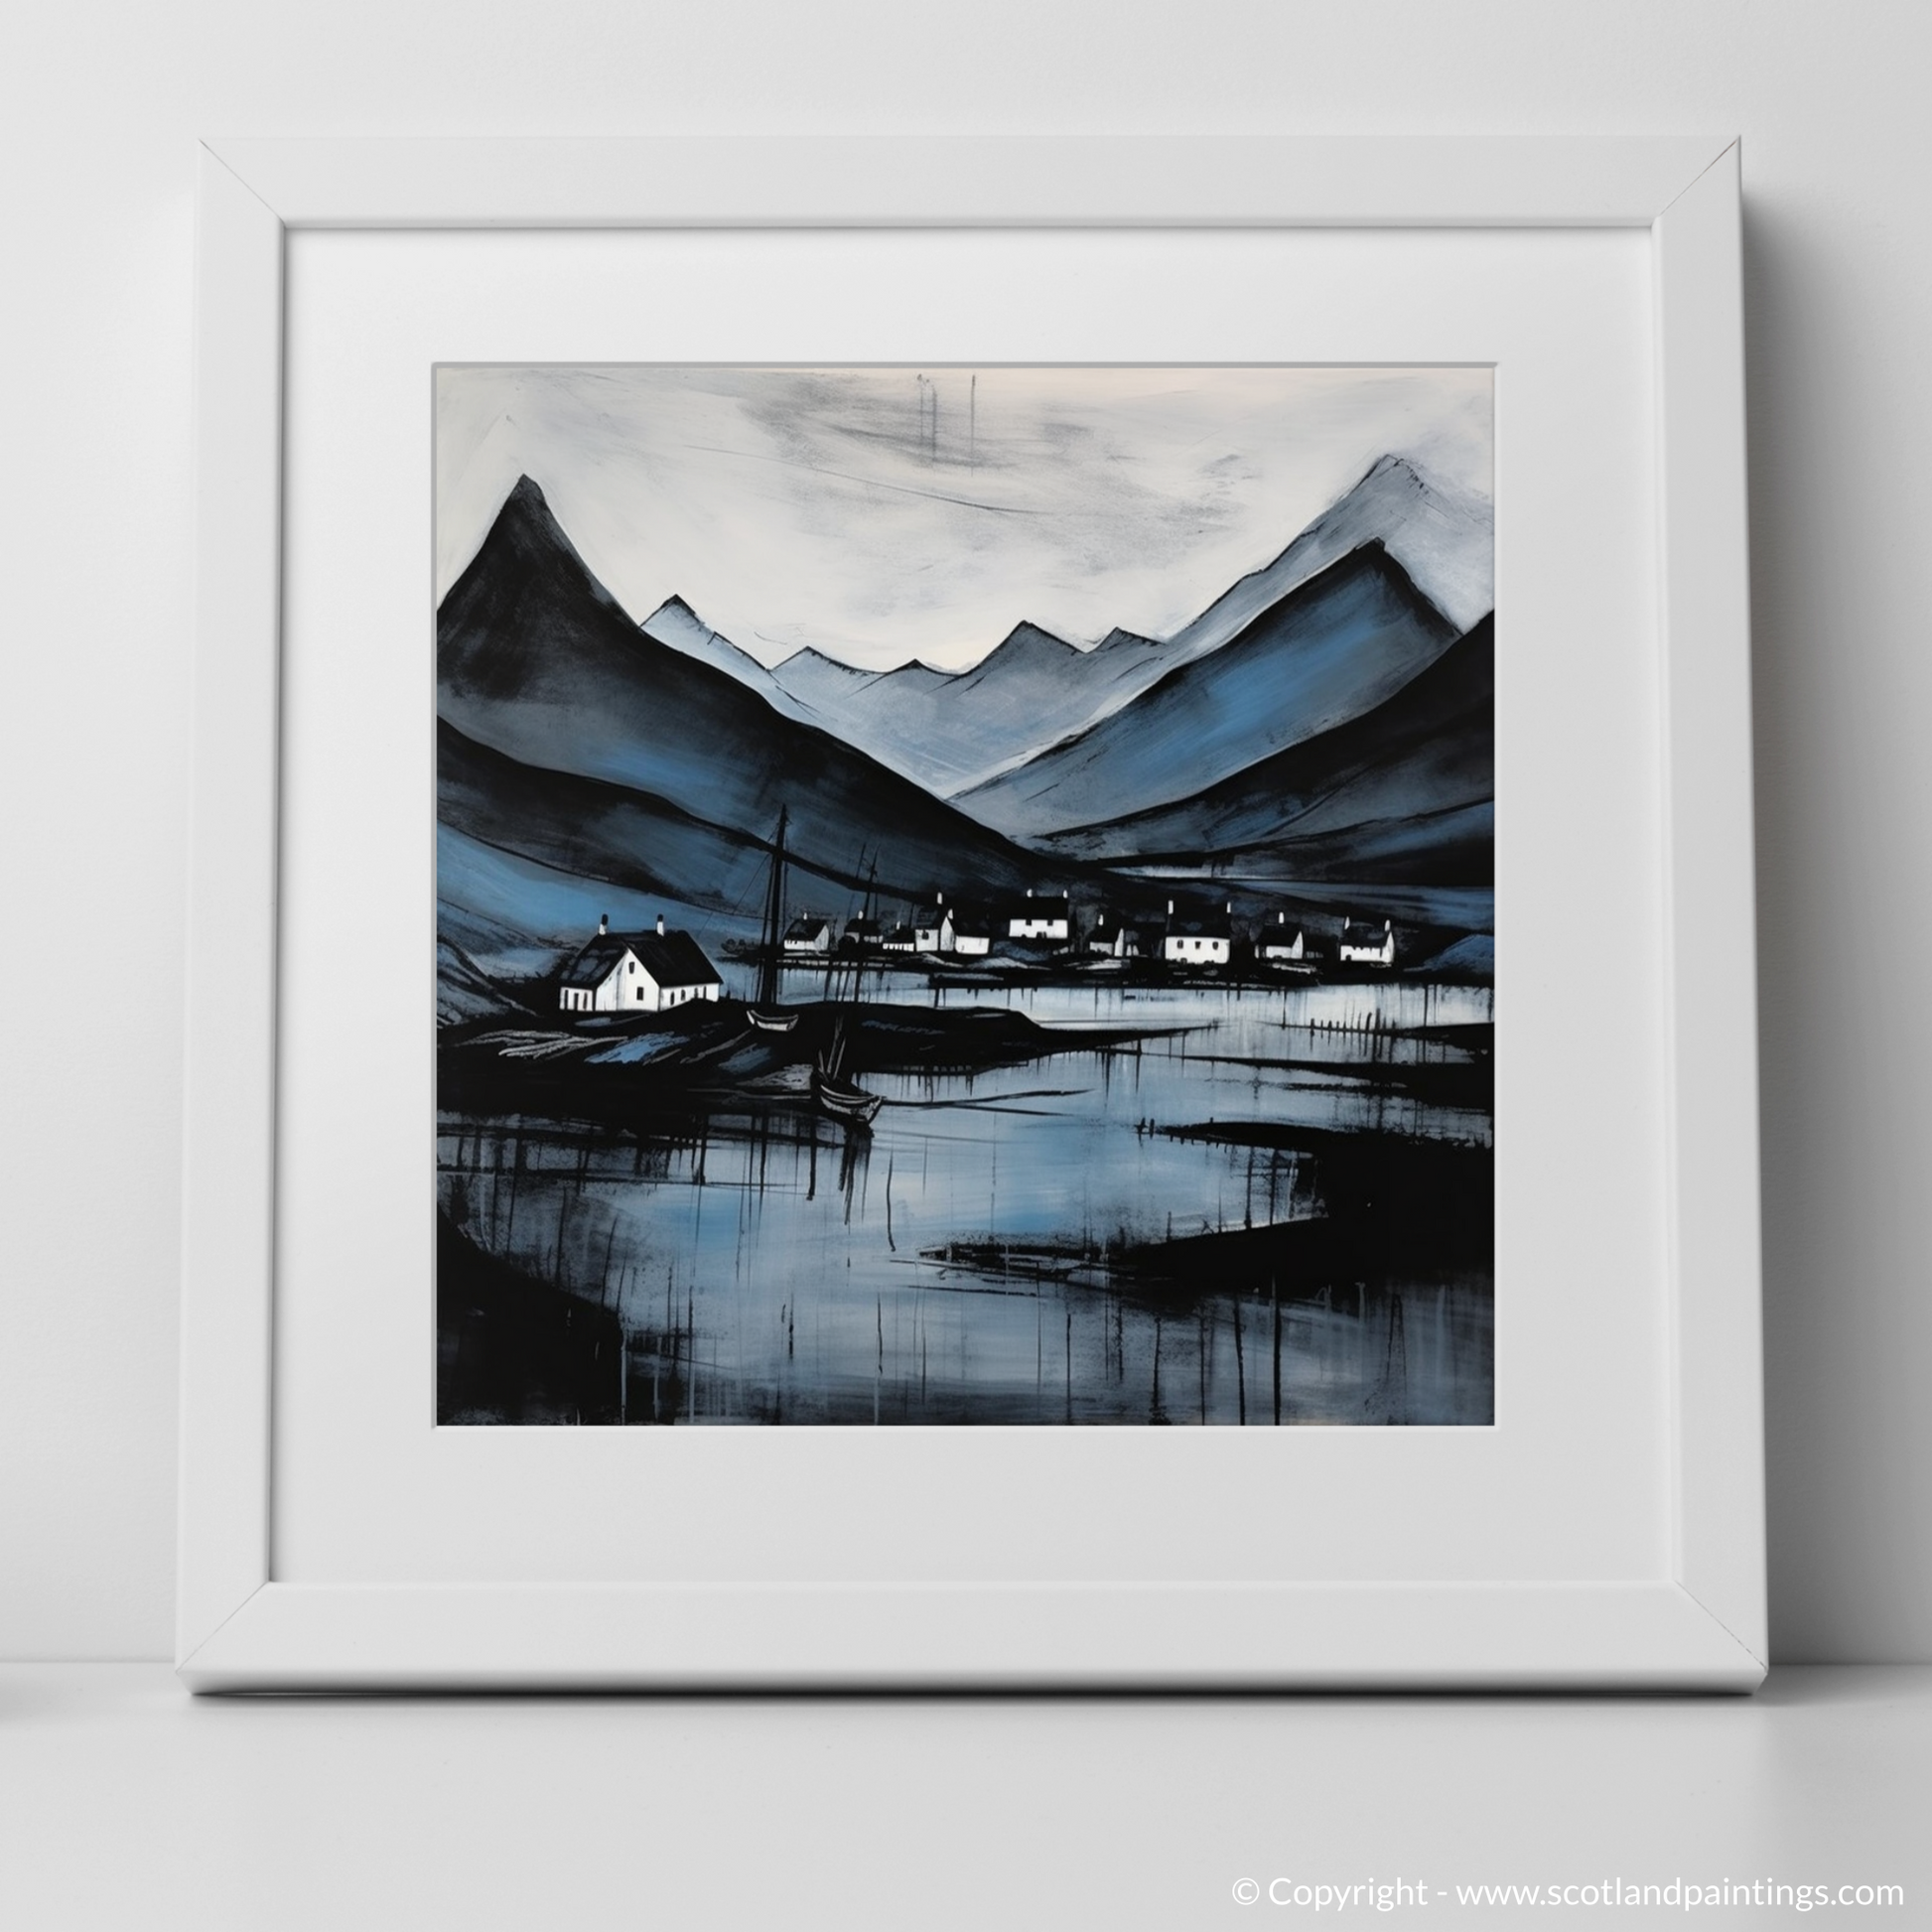 Art Print of Fort William, Highlands with a white frame